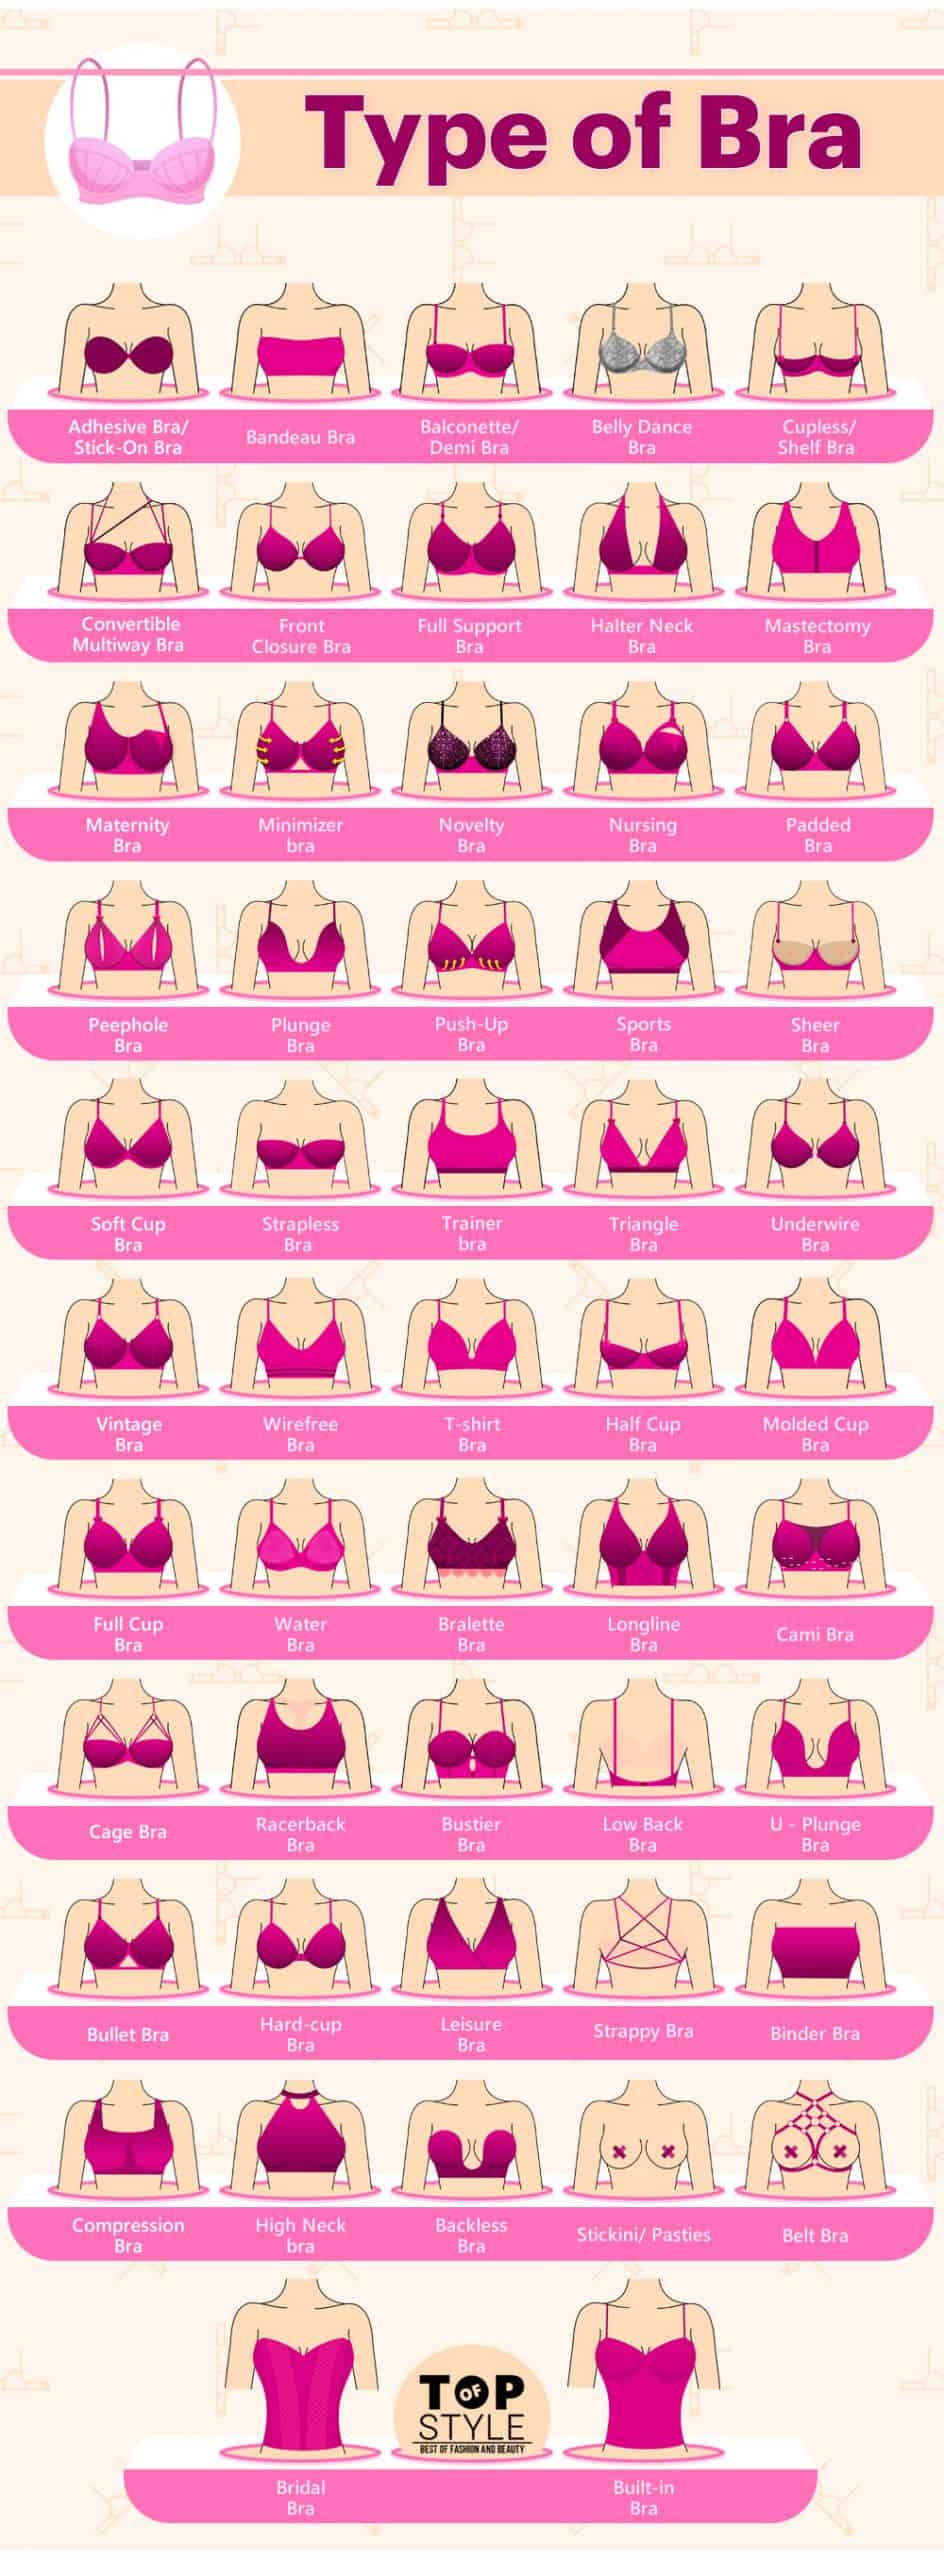 All possible types of bra available in market